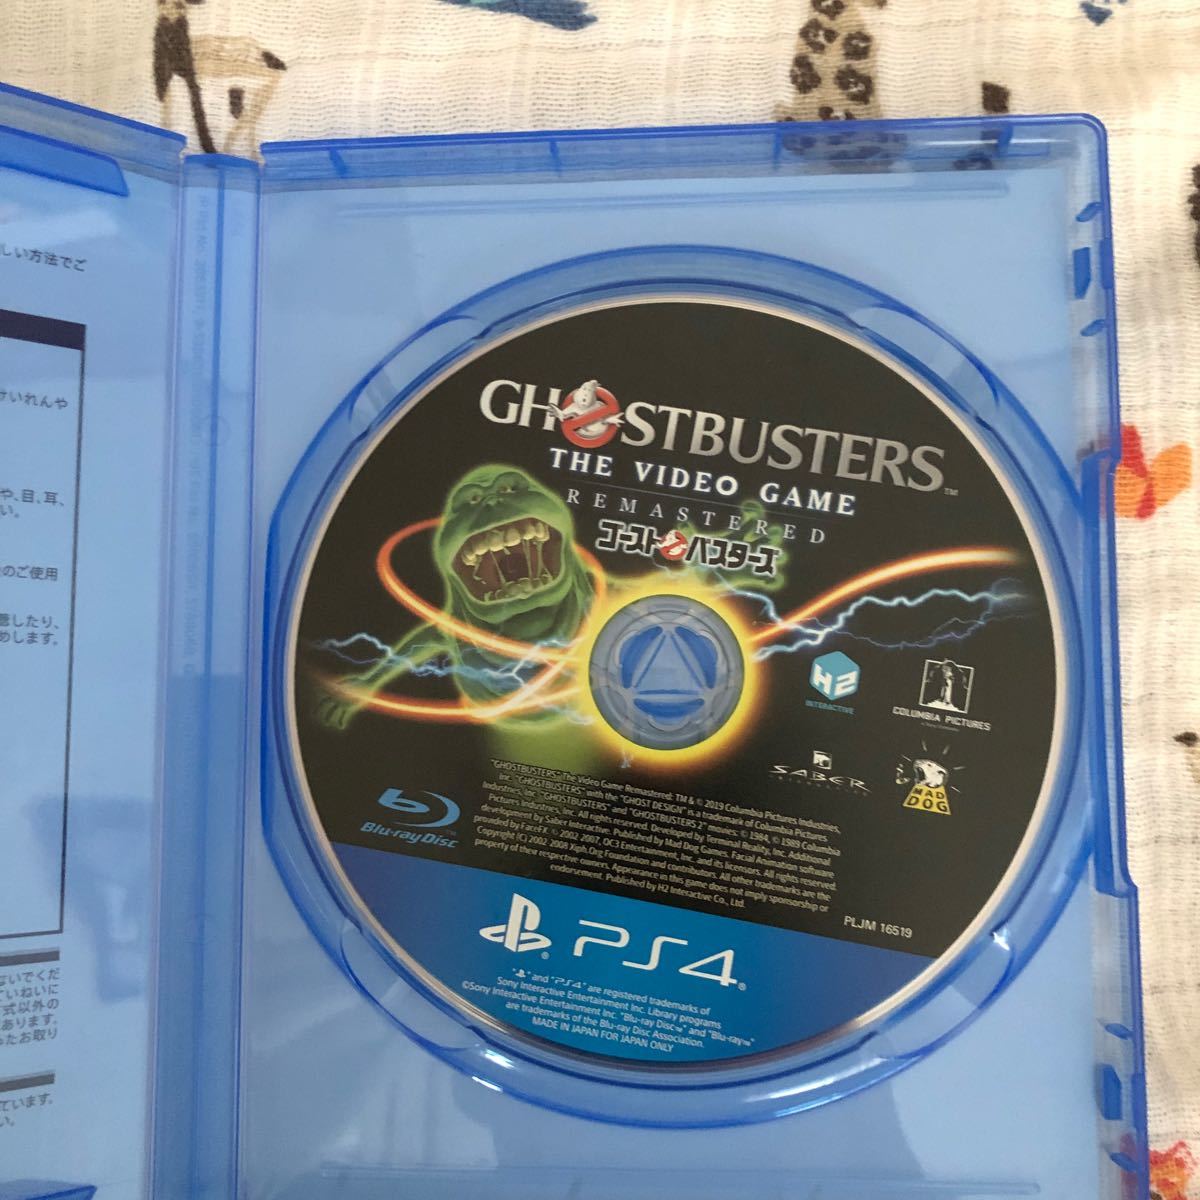 ＰＳ４ Ghostbusters:The Video Game Remastersd （ゴーストバスターズ）